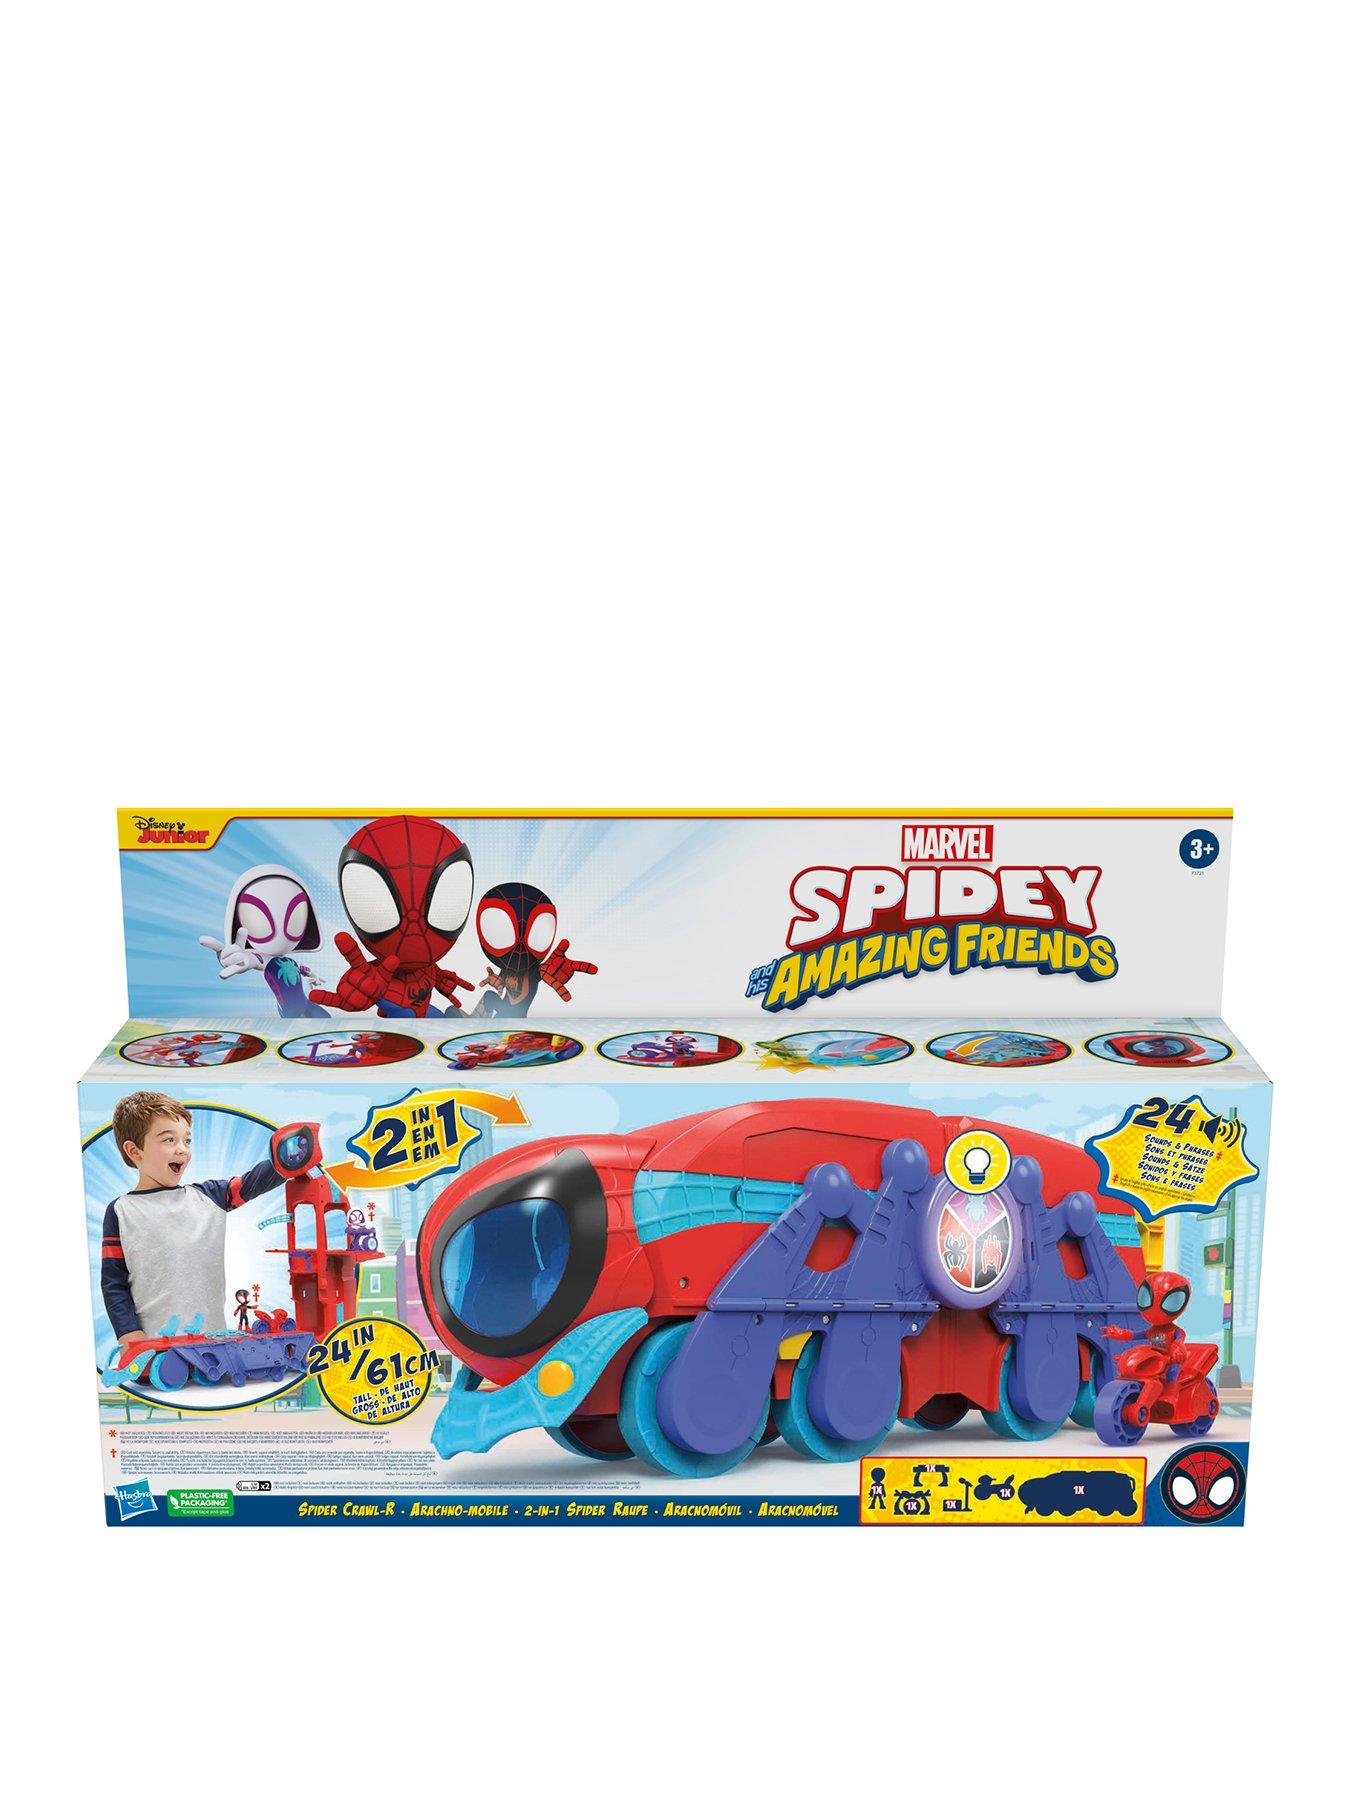 Marvel Spidey and His Amazing Friends Spider Crawl-R 2-in-1 Deluxe  Headquarters Playset, Preschool Toy for Age 3 and Up - Marvel